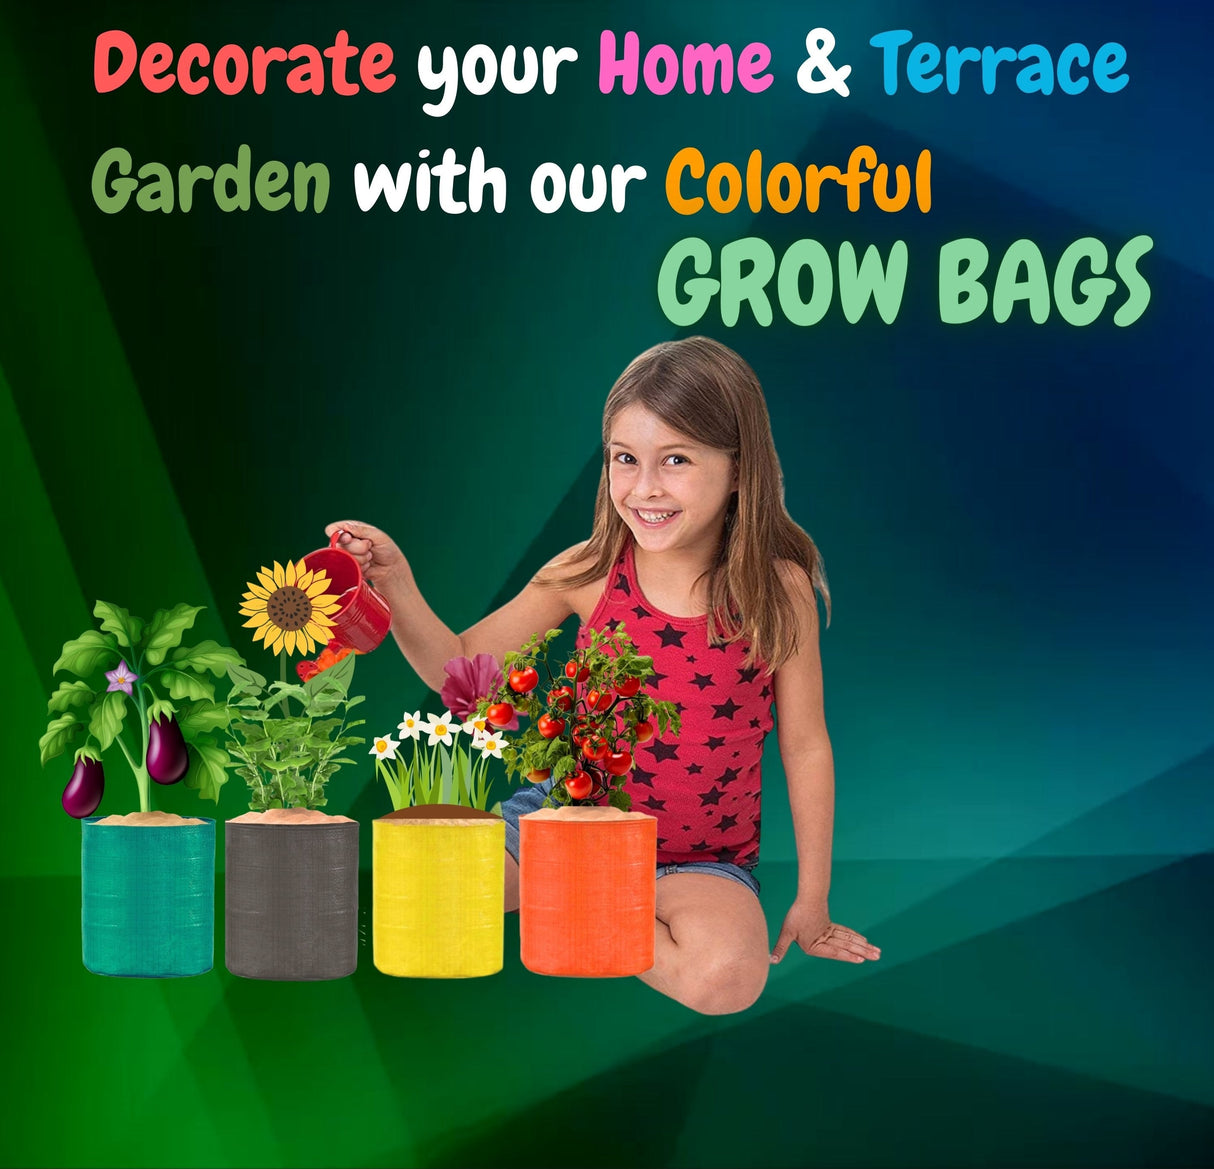 HDPE UV Protected Round Plants Grow Bags Pack of 8 PCS, 4 PCS 12x12 Inch & 4 PCS 9X9 Multicolored Suitable for Terrace and Vegetable Gardening - Singhal Mart